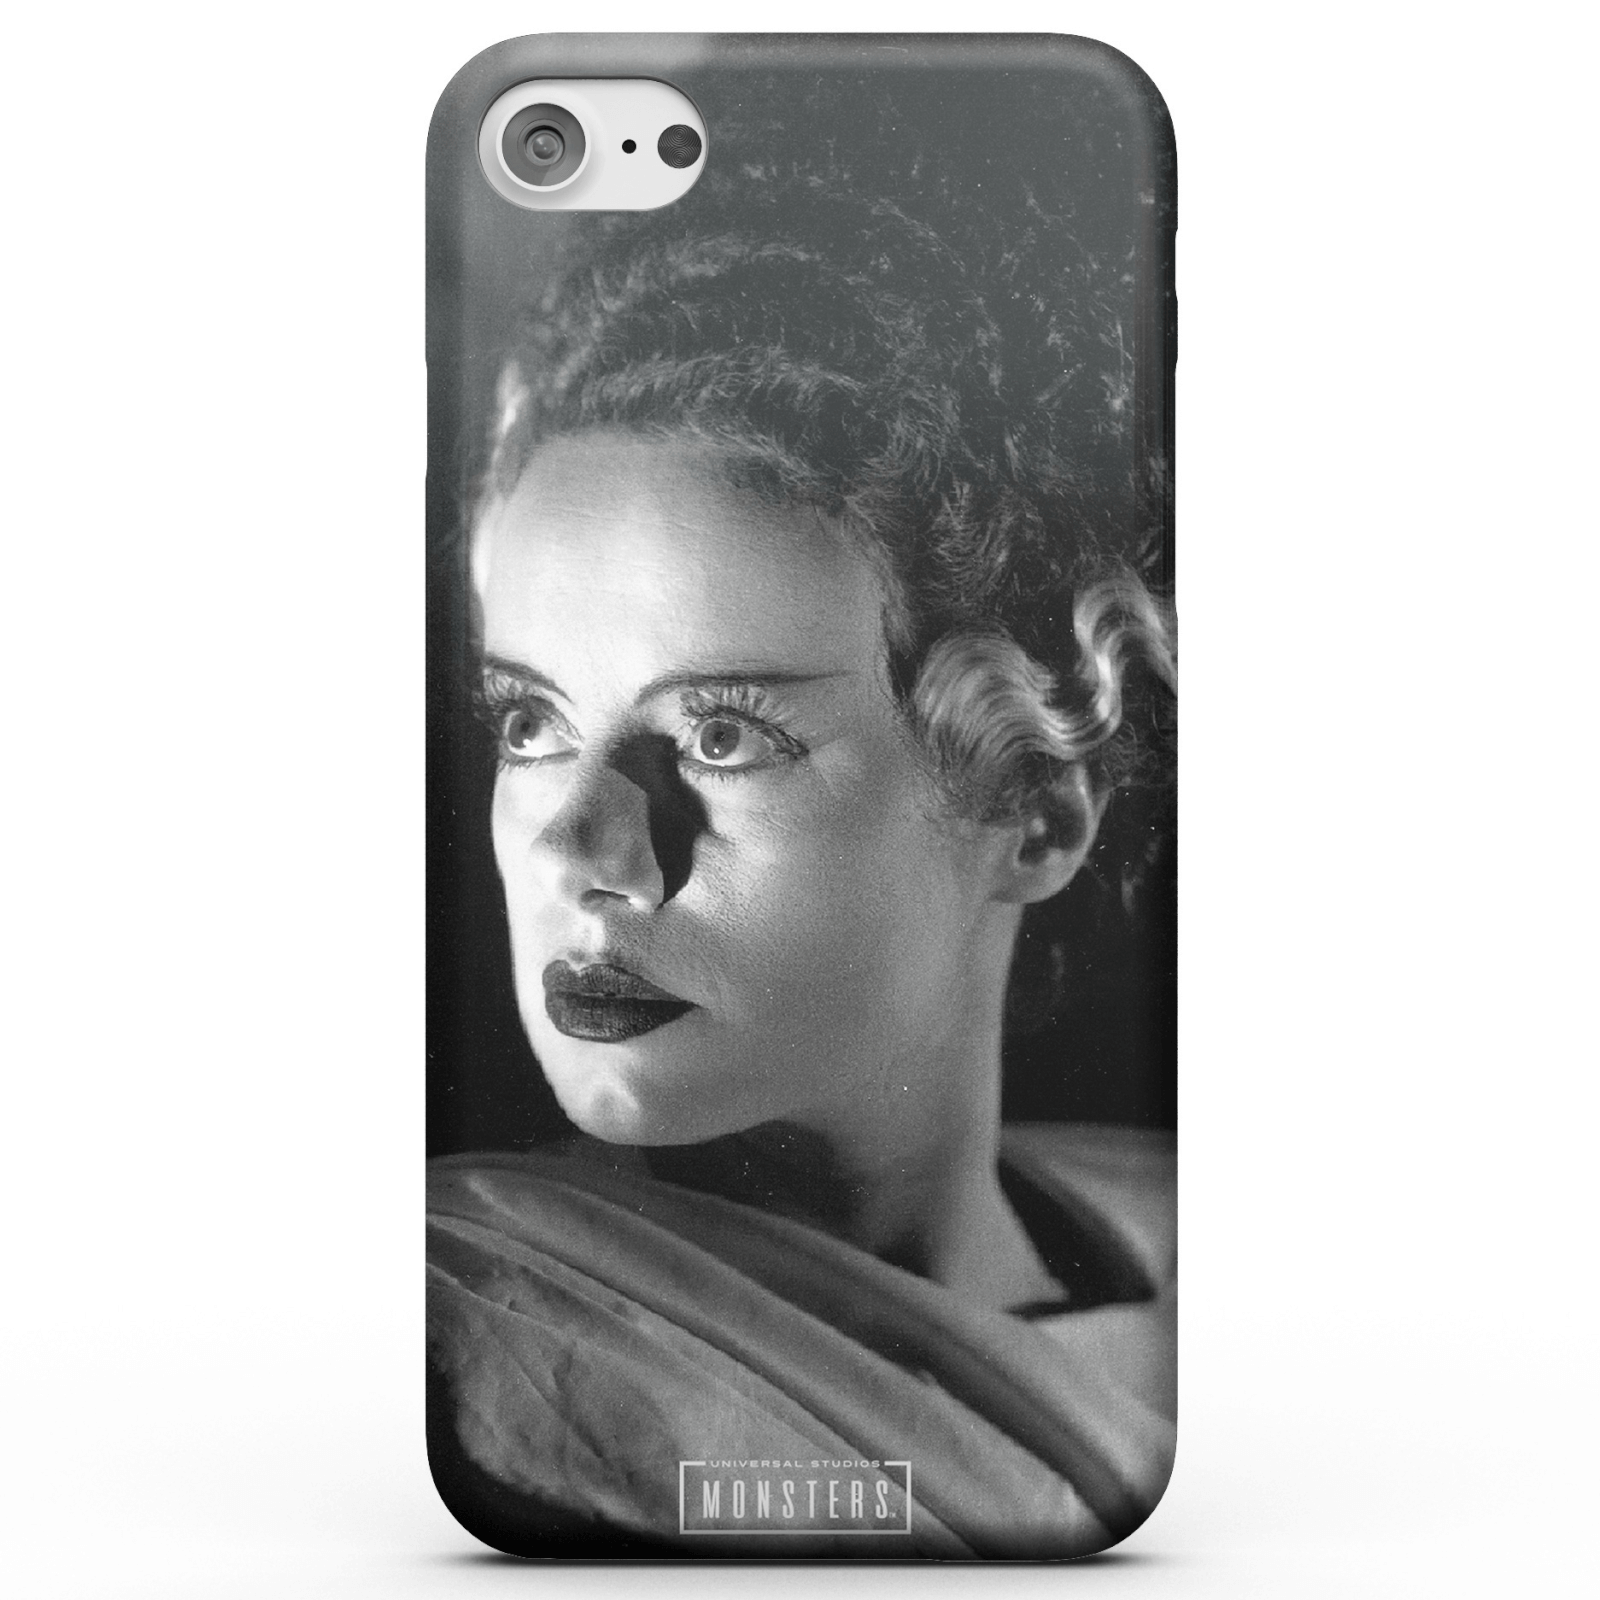 Universal Monsters Bride Of Frankenstein Classic Phone Case for iPhone and Android - iPhone 11 - Snap Case - Matte